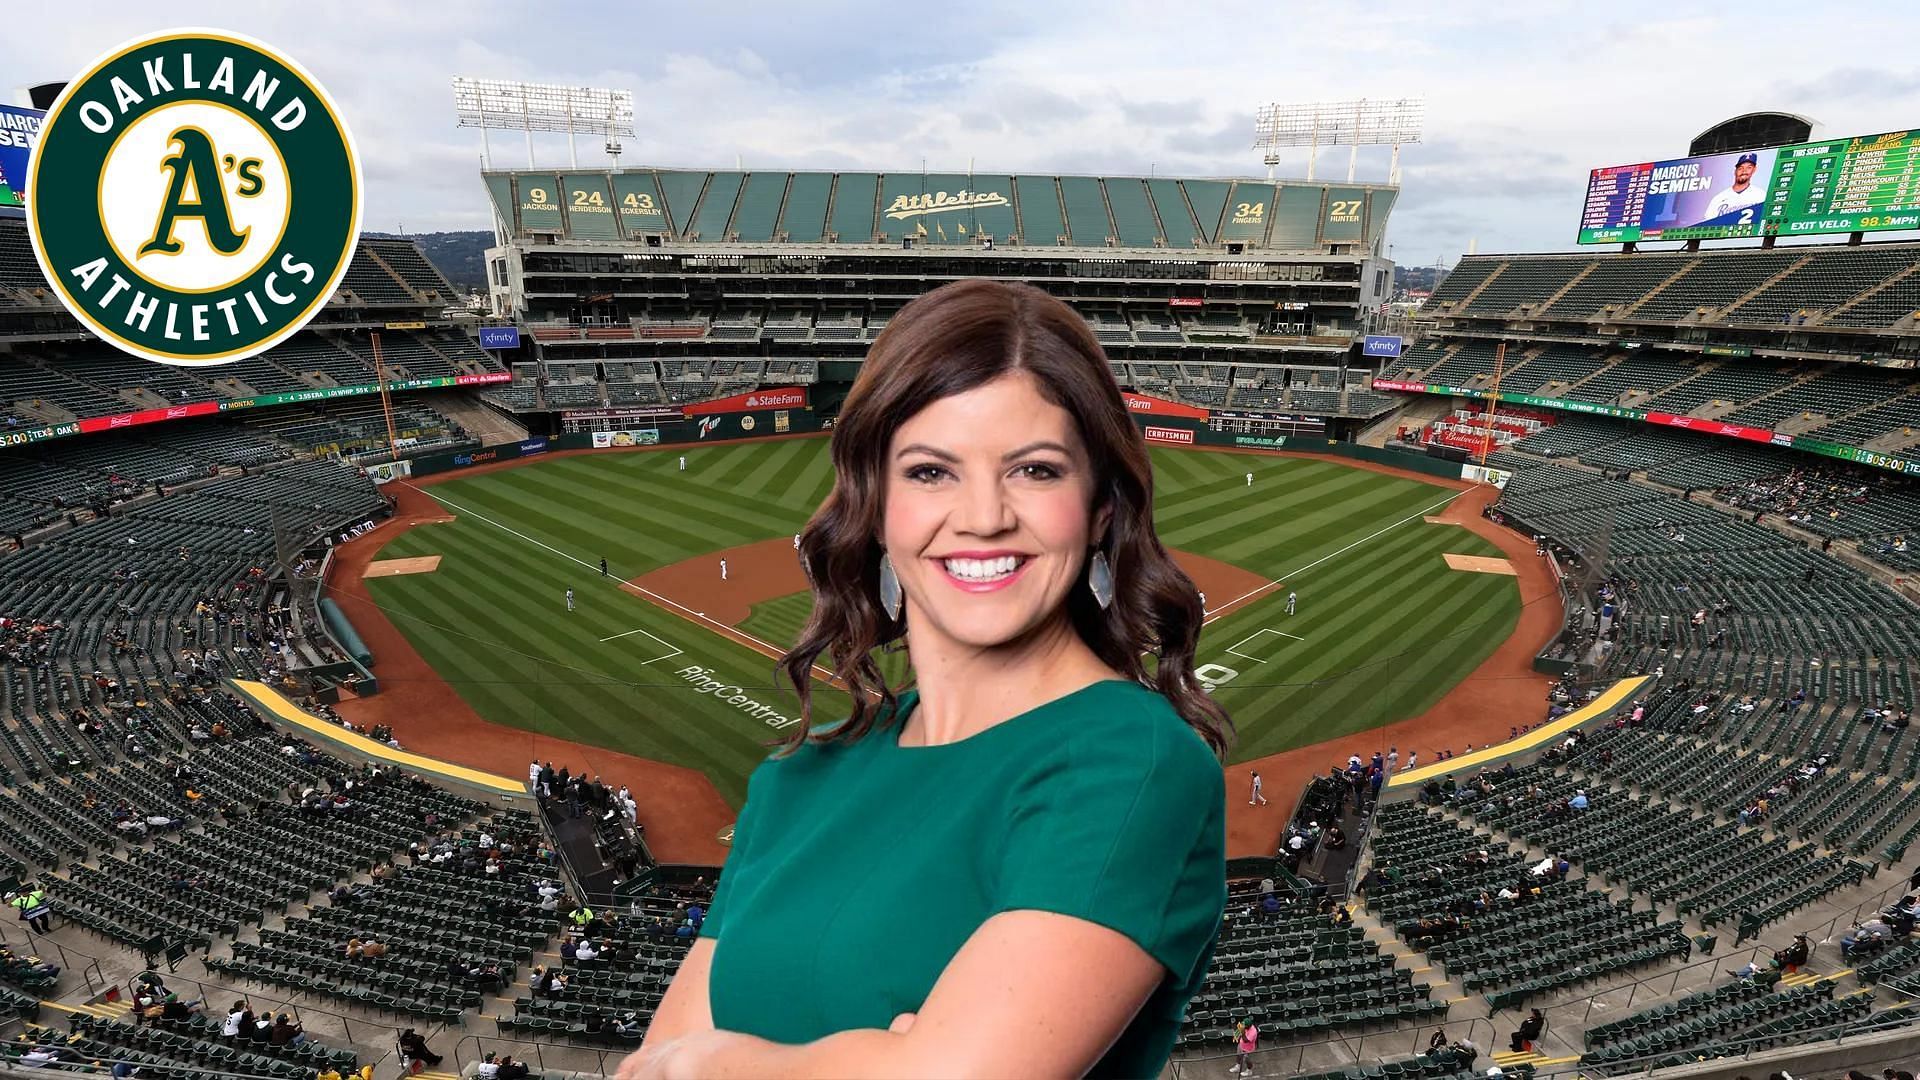 Fans advocate for more women in baseball as Jenny Cavnar makes history as MLB